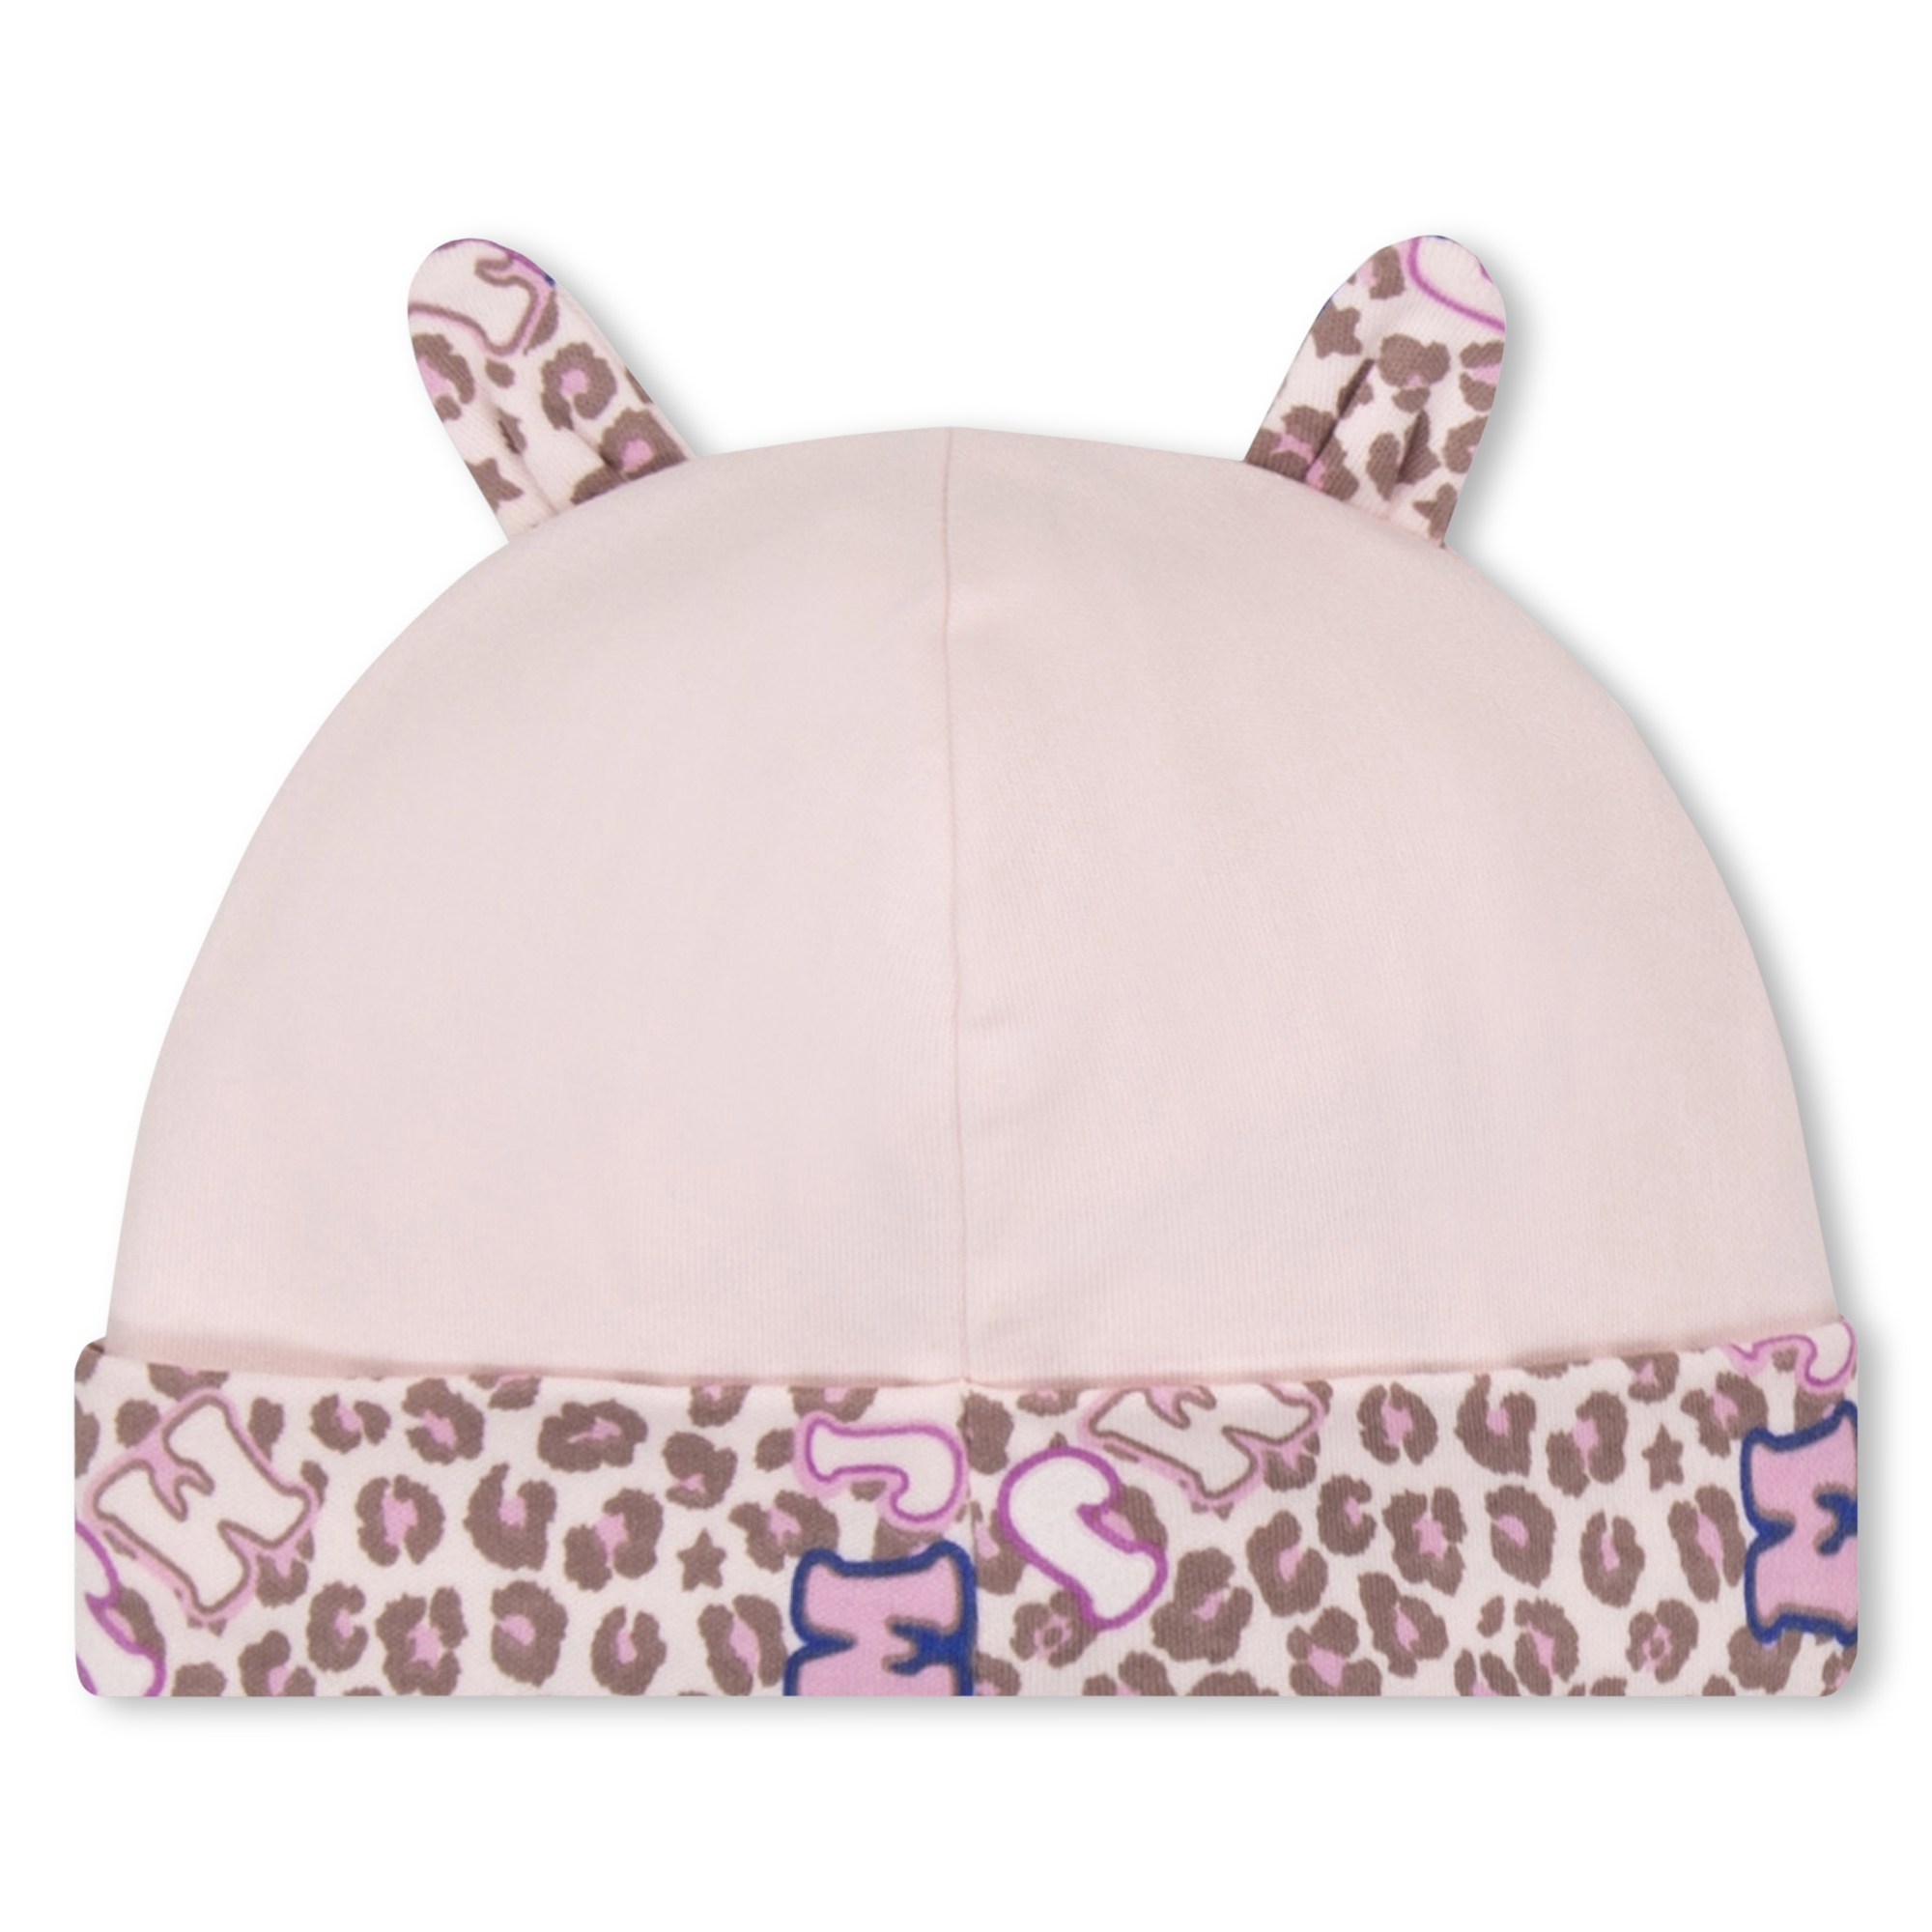 Cotton onesie and hat set MARC JACOBS for UNISEX